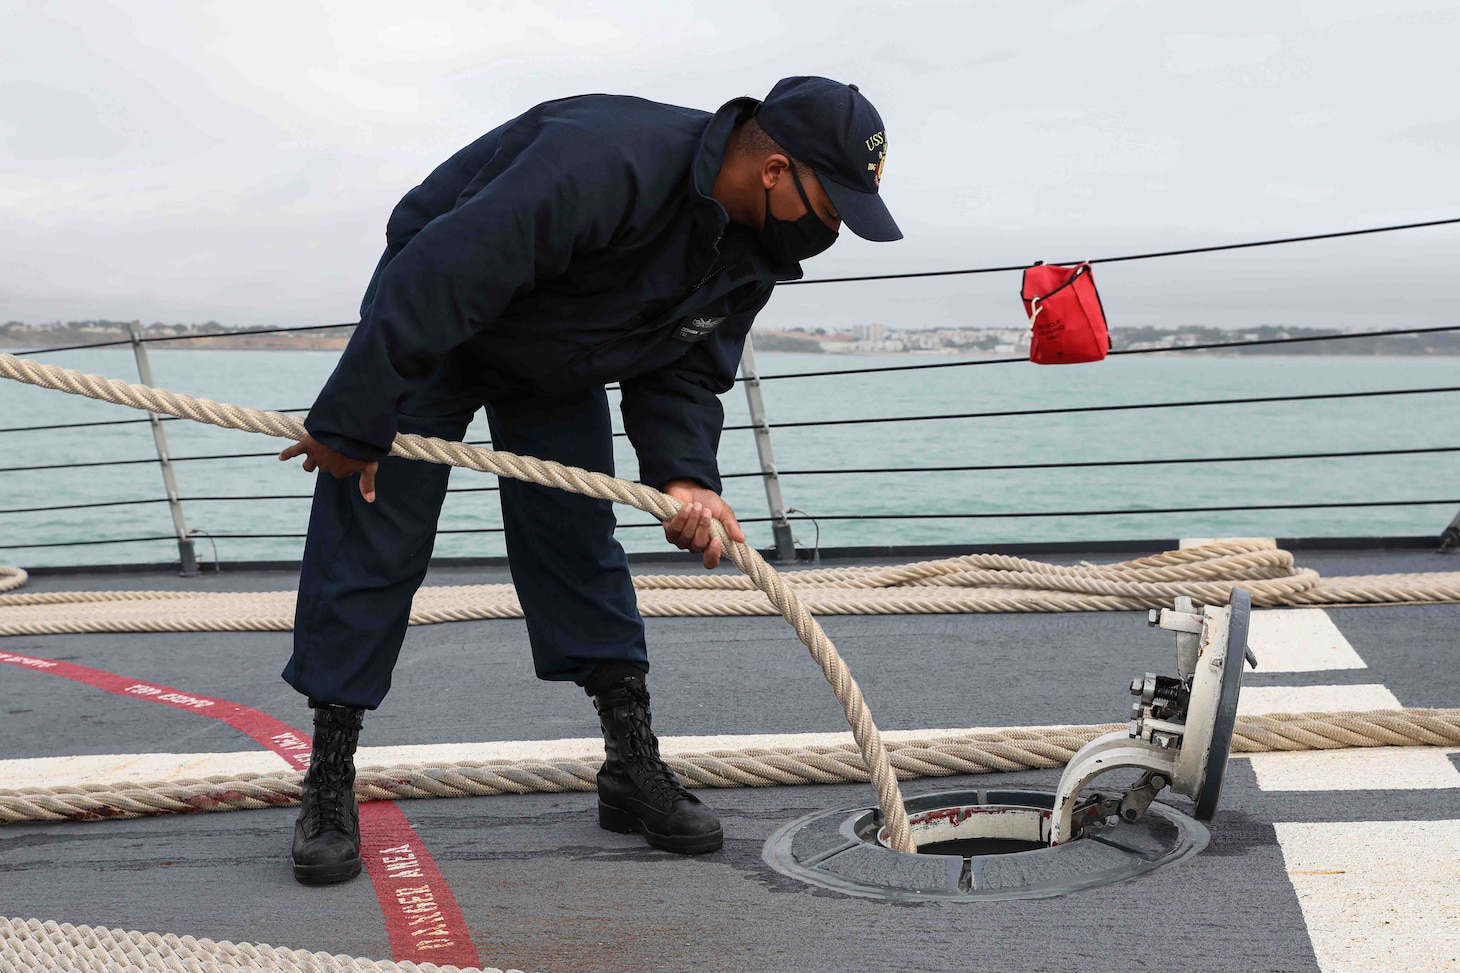 Personnel Specialist 2nd Class Deshawn McGowan, assigned to the Arleigh Burke-class guided-missile destroyer USS Ross (DDG 71), stows a mooring line as the ship leaves port at Naval Station Rota, Spain, Dec. 27, 2021. Ross, forward-deployed to Rota, Spain, is on its 12th patrol in the U.S. Sixth Fleet area of operations in support of regional allies and partners and U.S. national security interests in Europe and Africa. (U.S. Navy photo by Mass Communication Specialist 2nd Class Claire DuBois/Released)